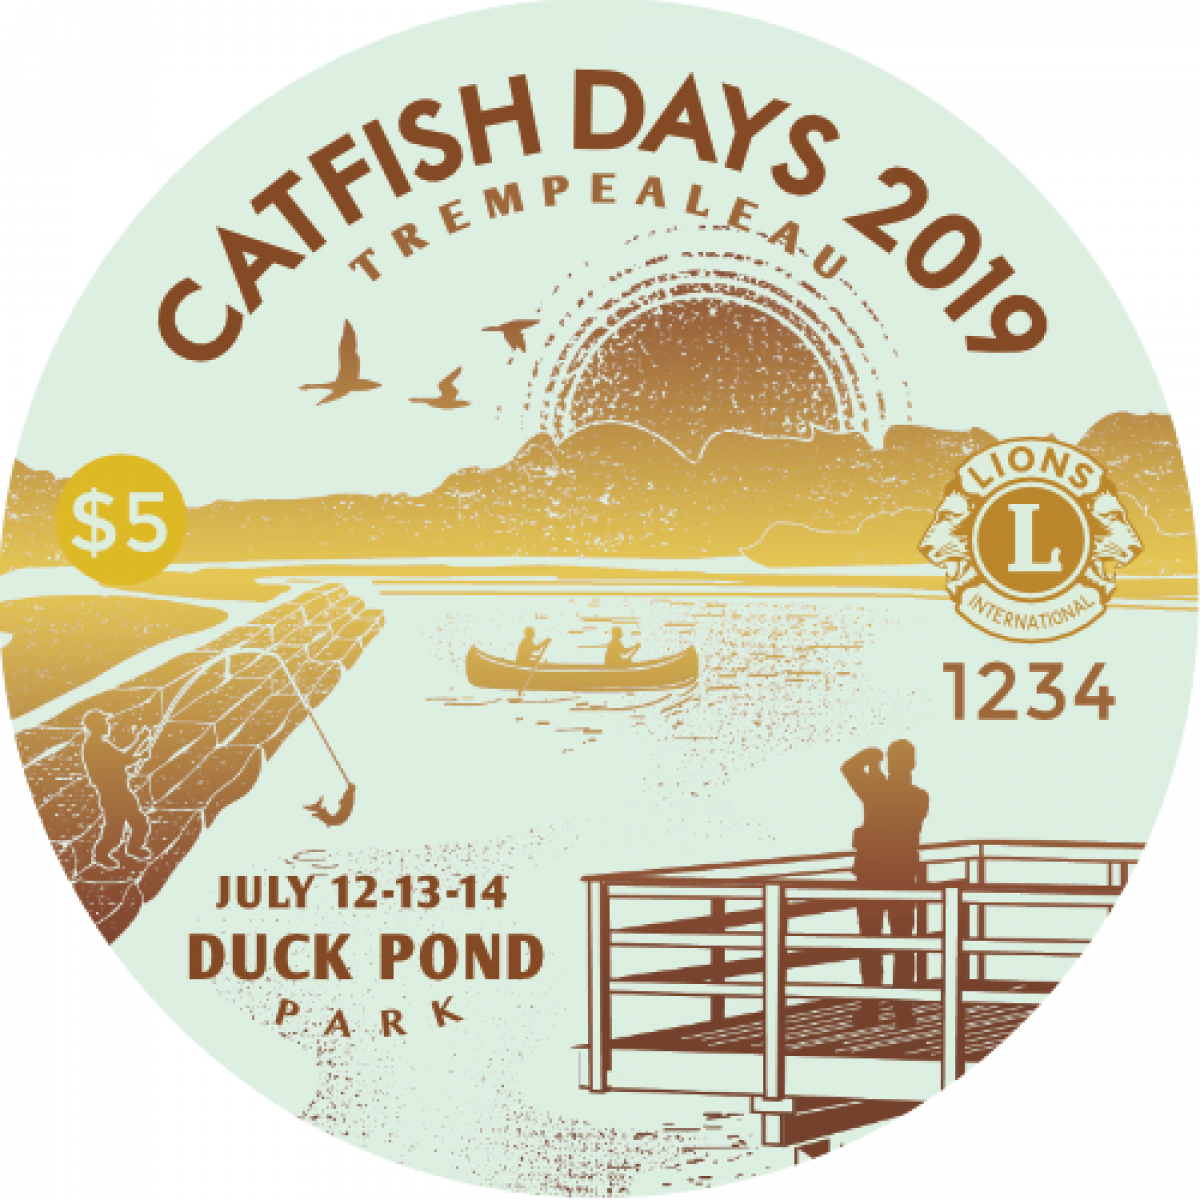 Catfish Days 2019 | Trempealeau Chamber of Commerce and Tourism